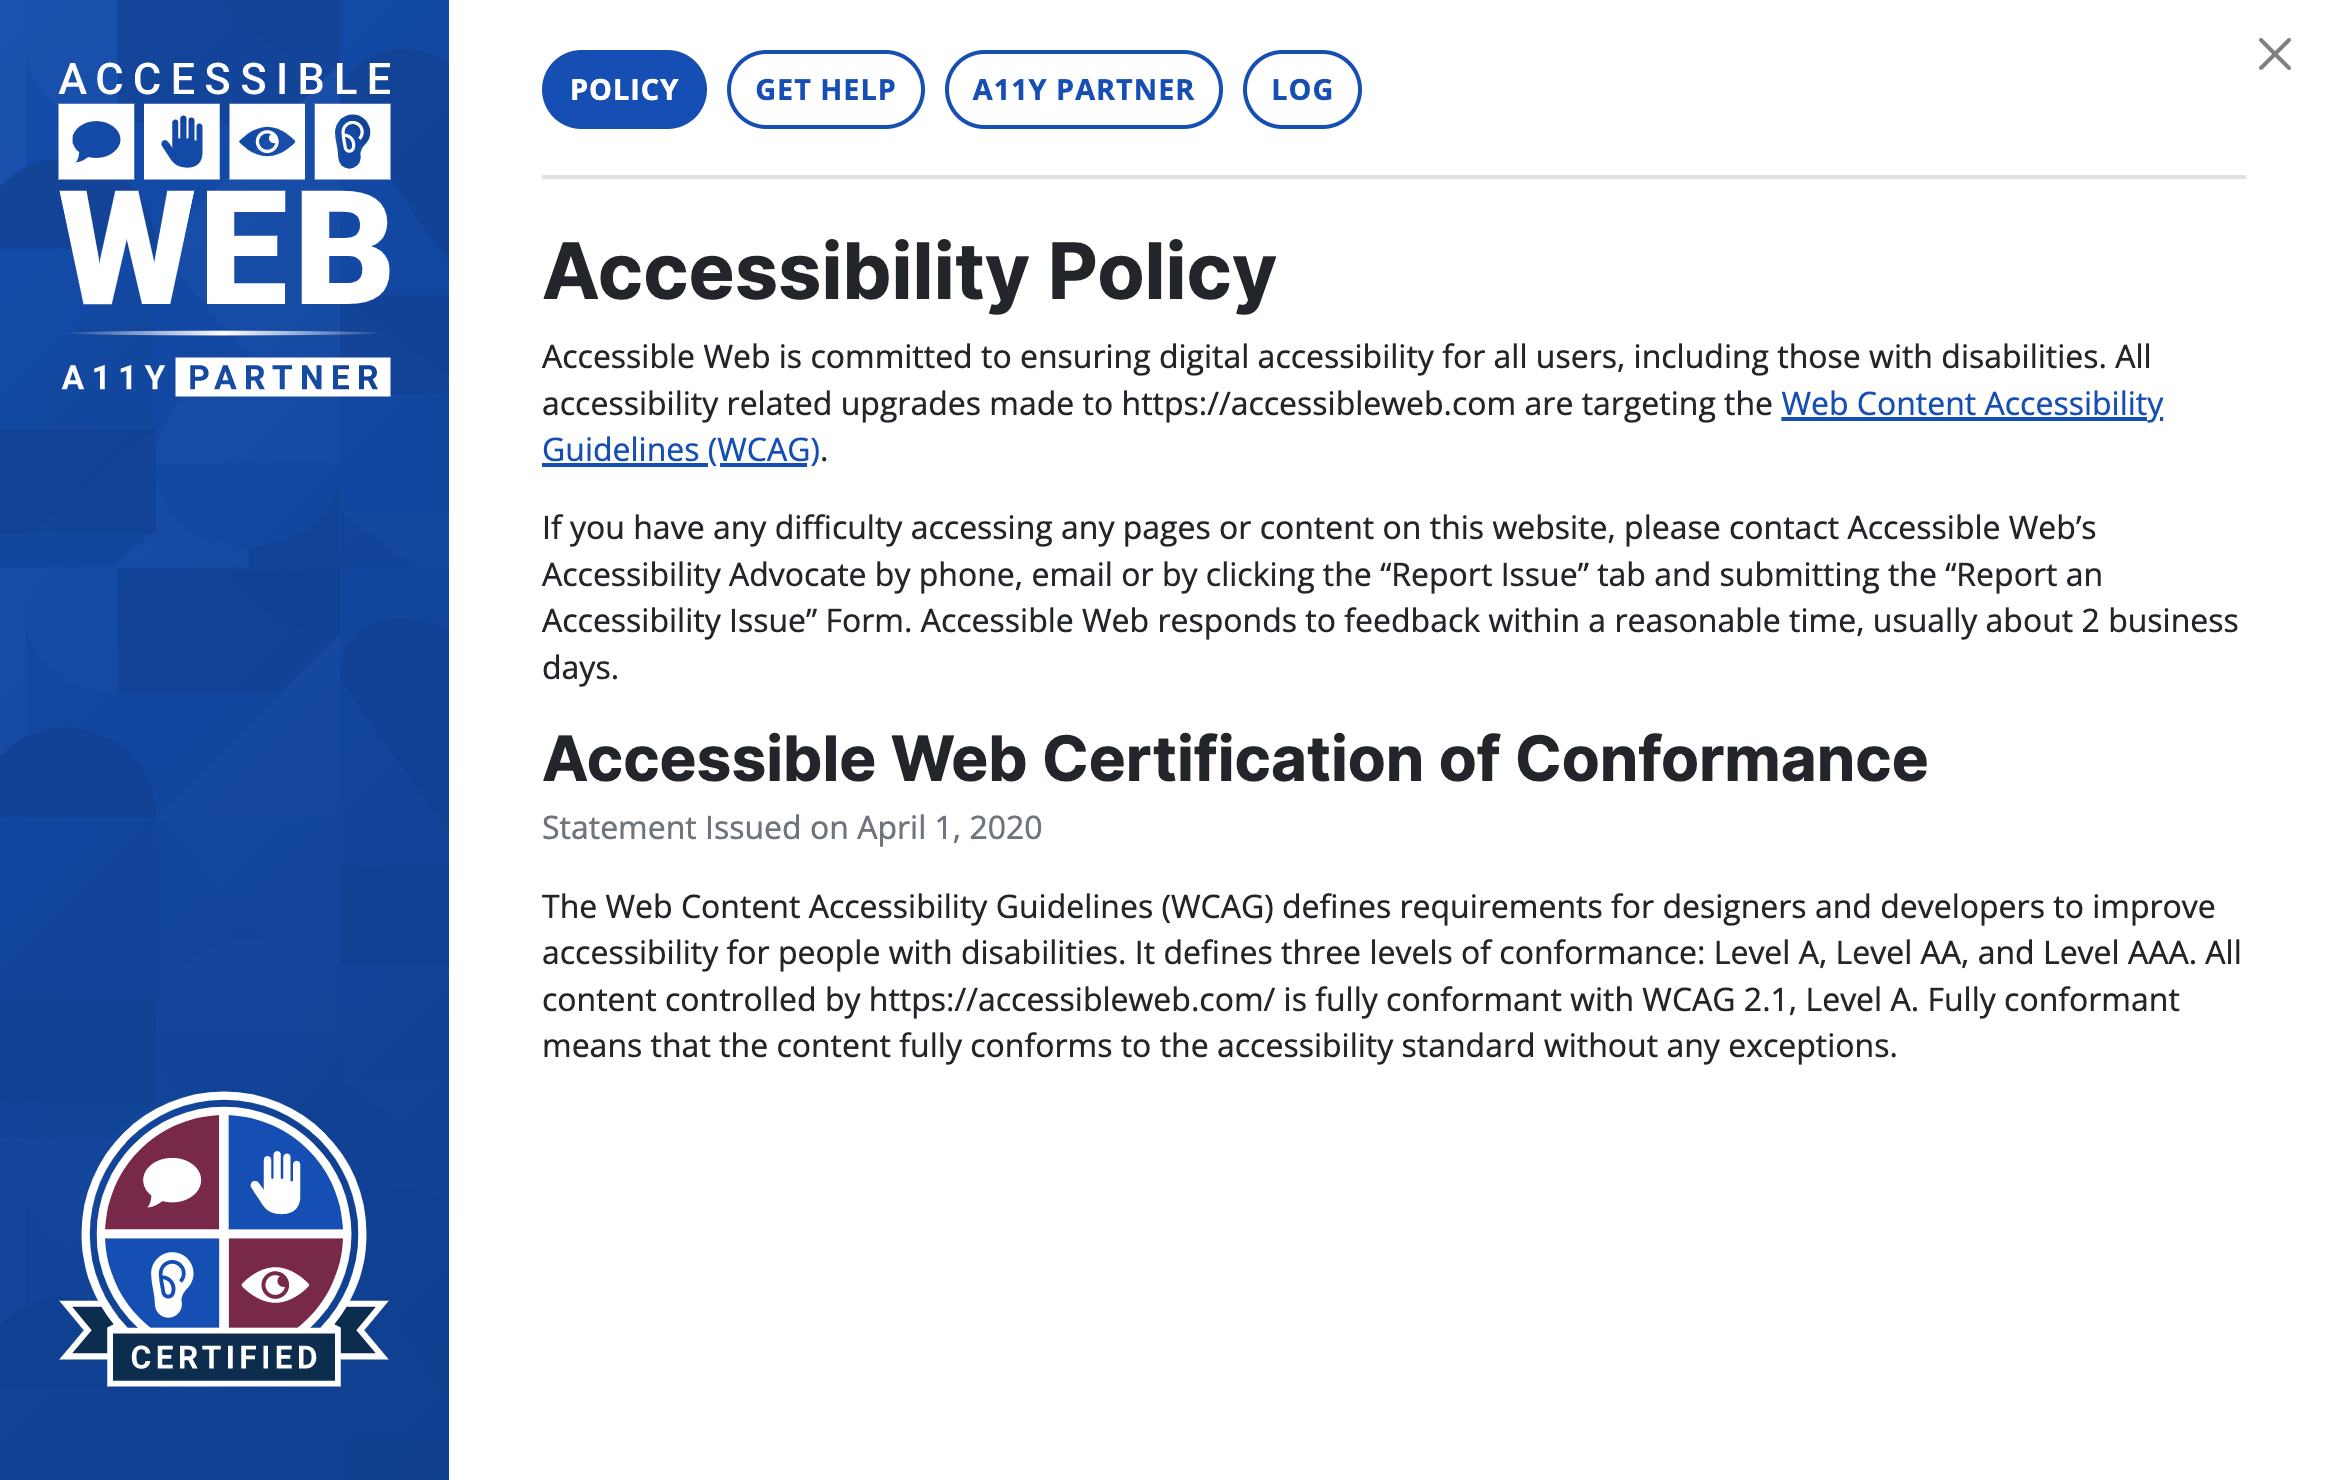 A screenshot of Accessible Web's accessibility policy displaying a statement of certification.